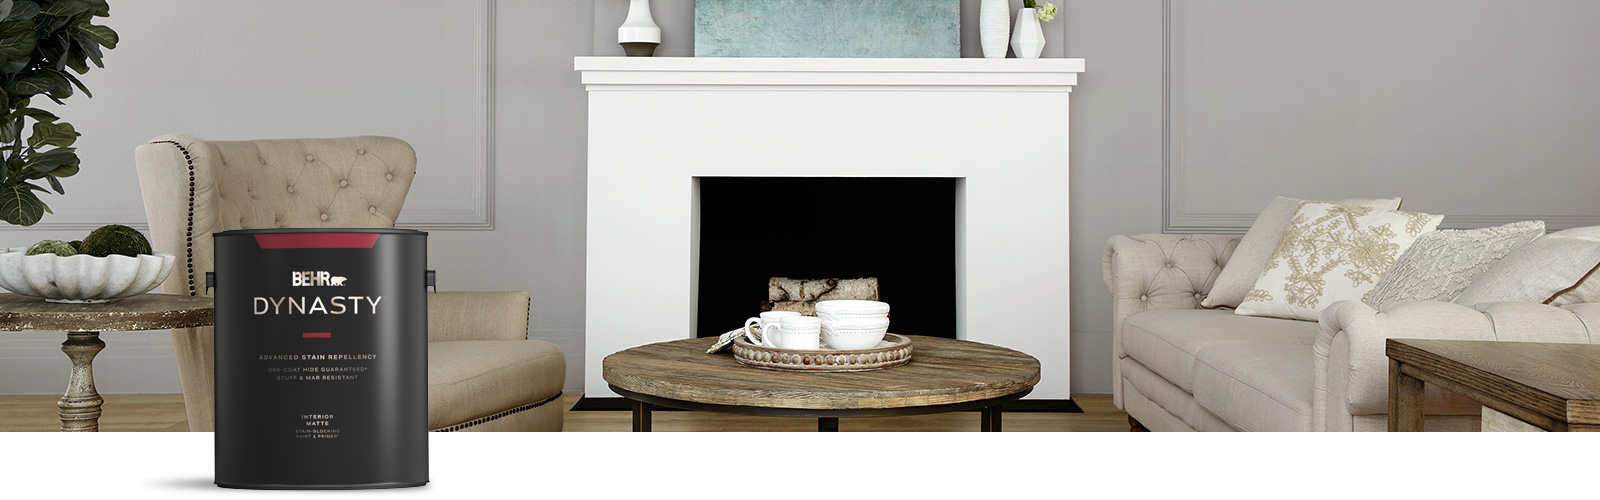 gray living room image with Behr Dynasty Interior paint can in the foreground